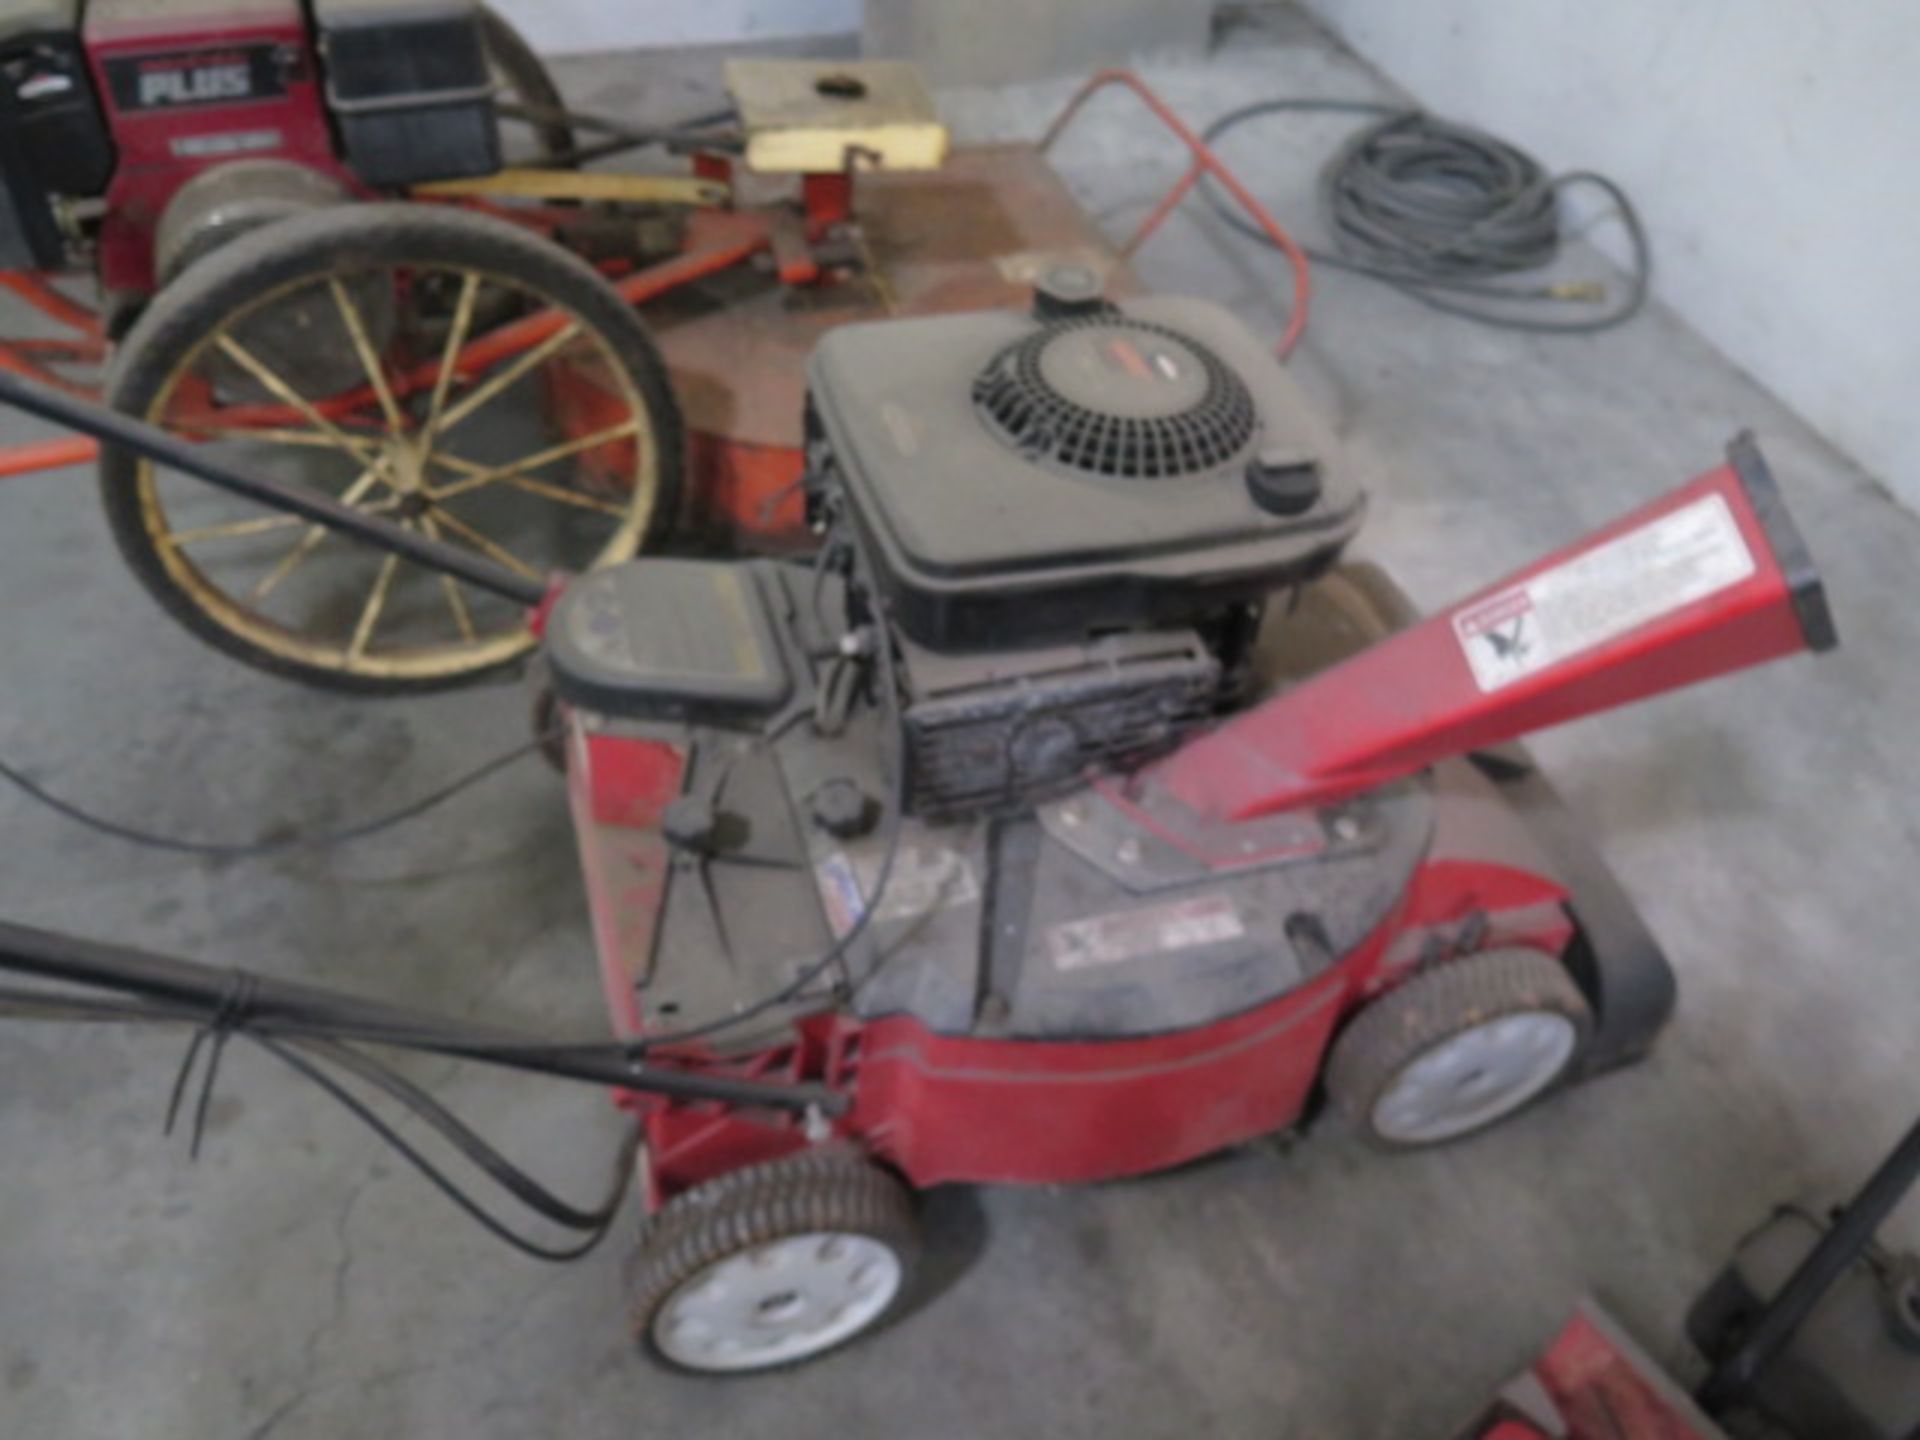 Troyt-Bilt Gas Powered Chipper (SOLD AS-IS - NO WARRANTY) - Image 4 of 5